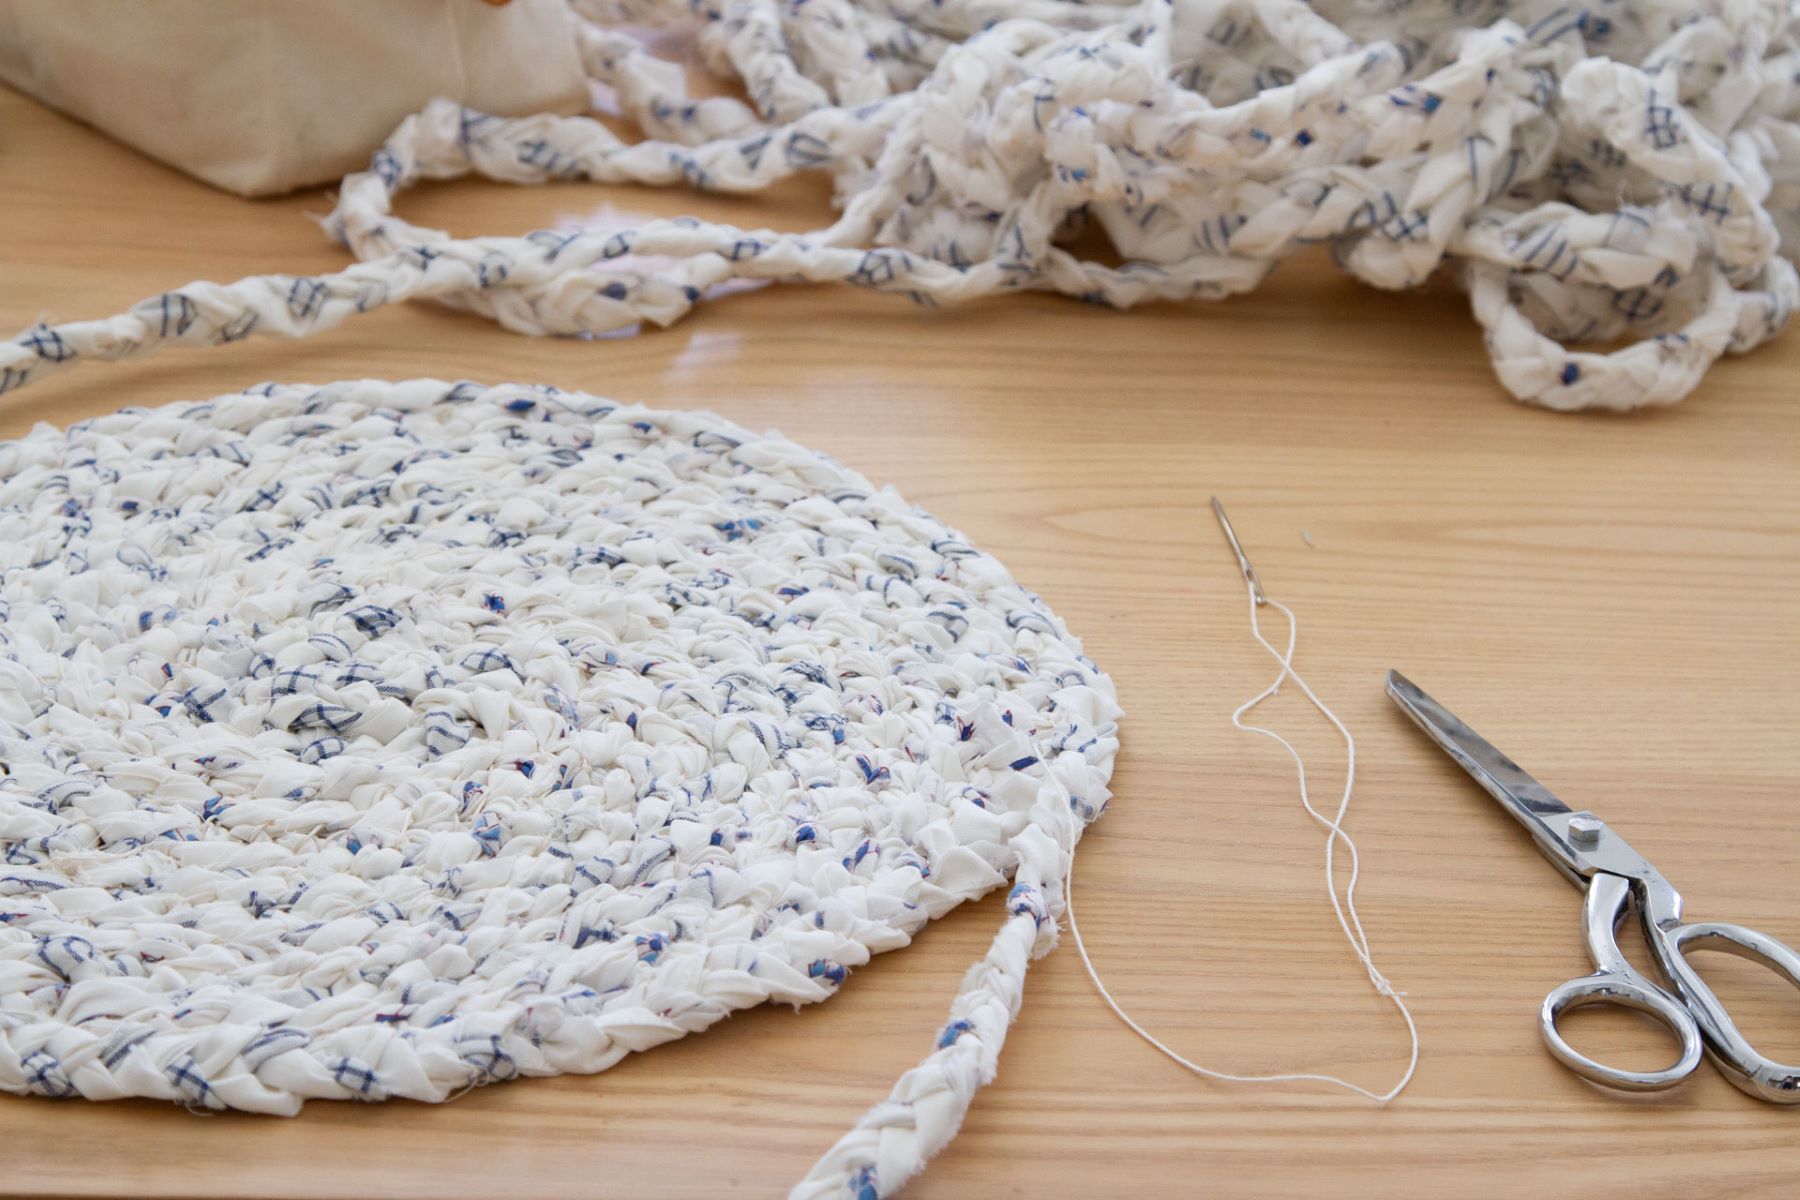 How To Make Braided Rugs